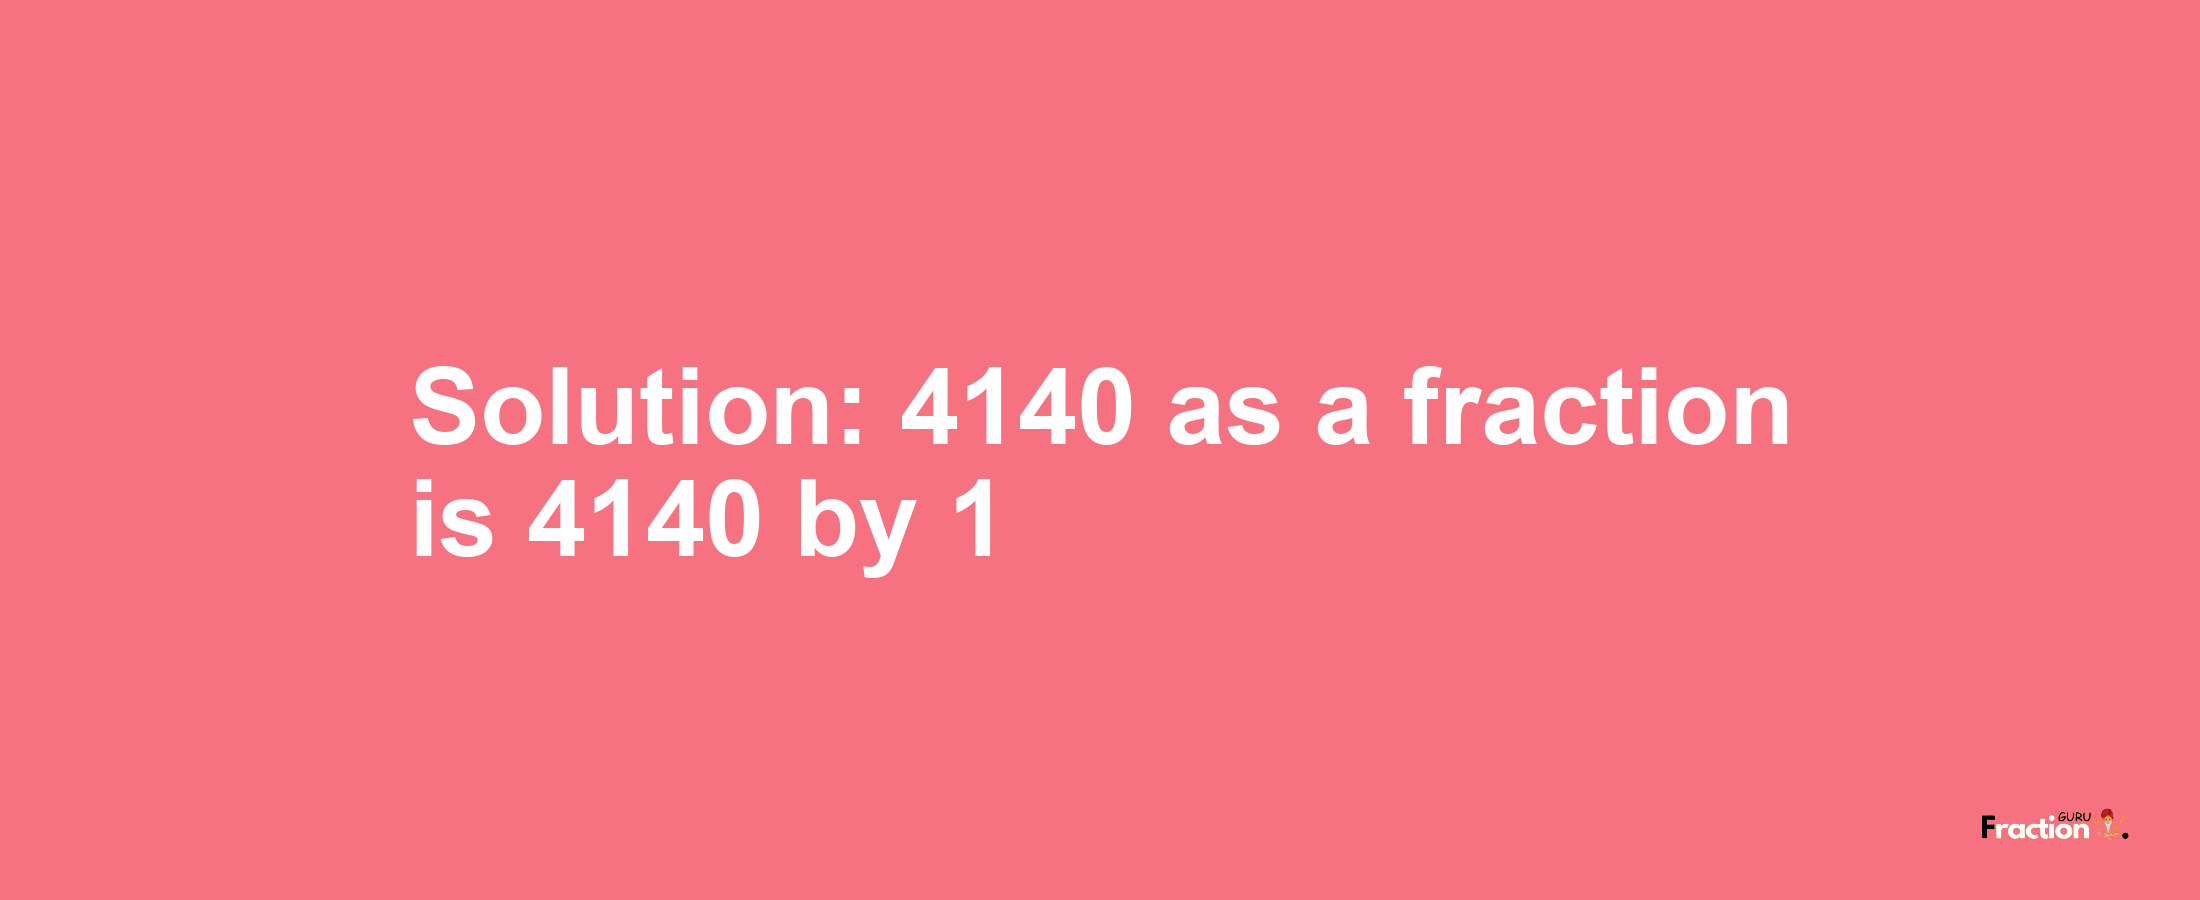 Solution:4140 as a fraction is 4140/1